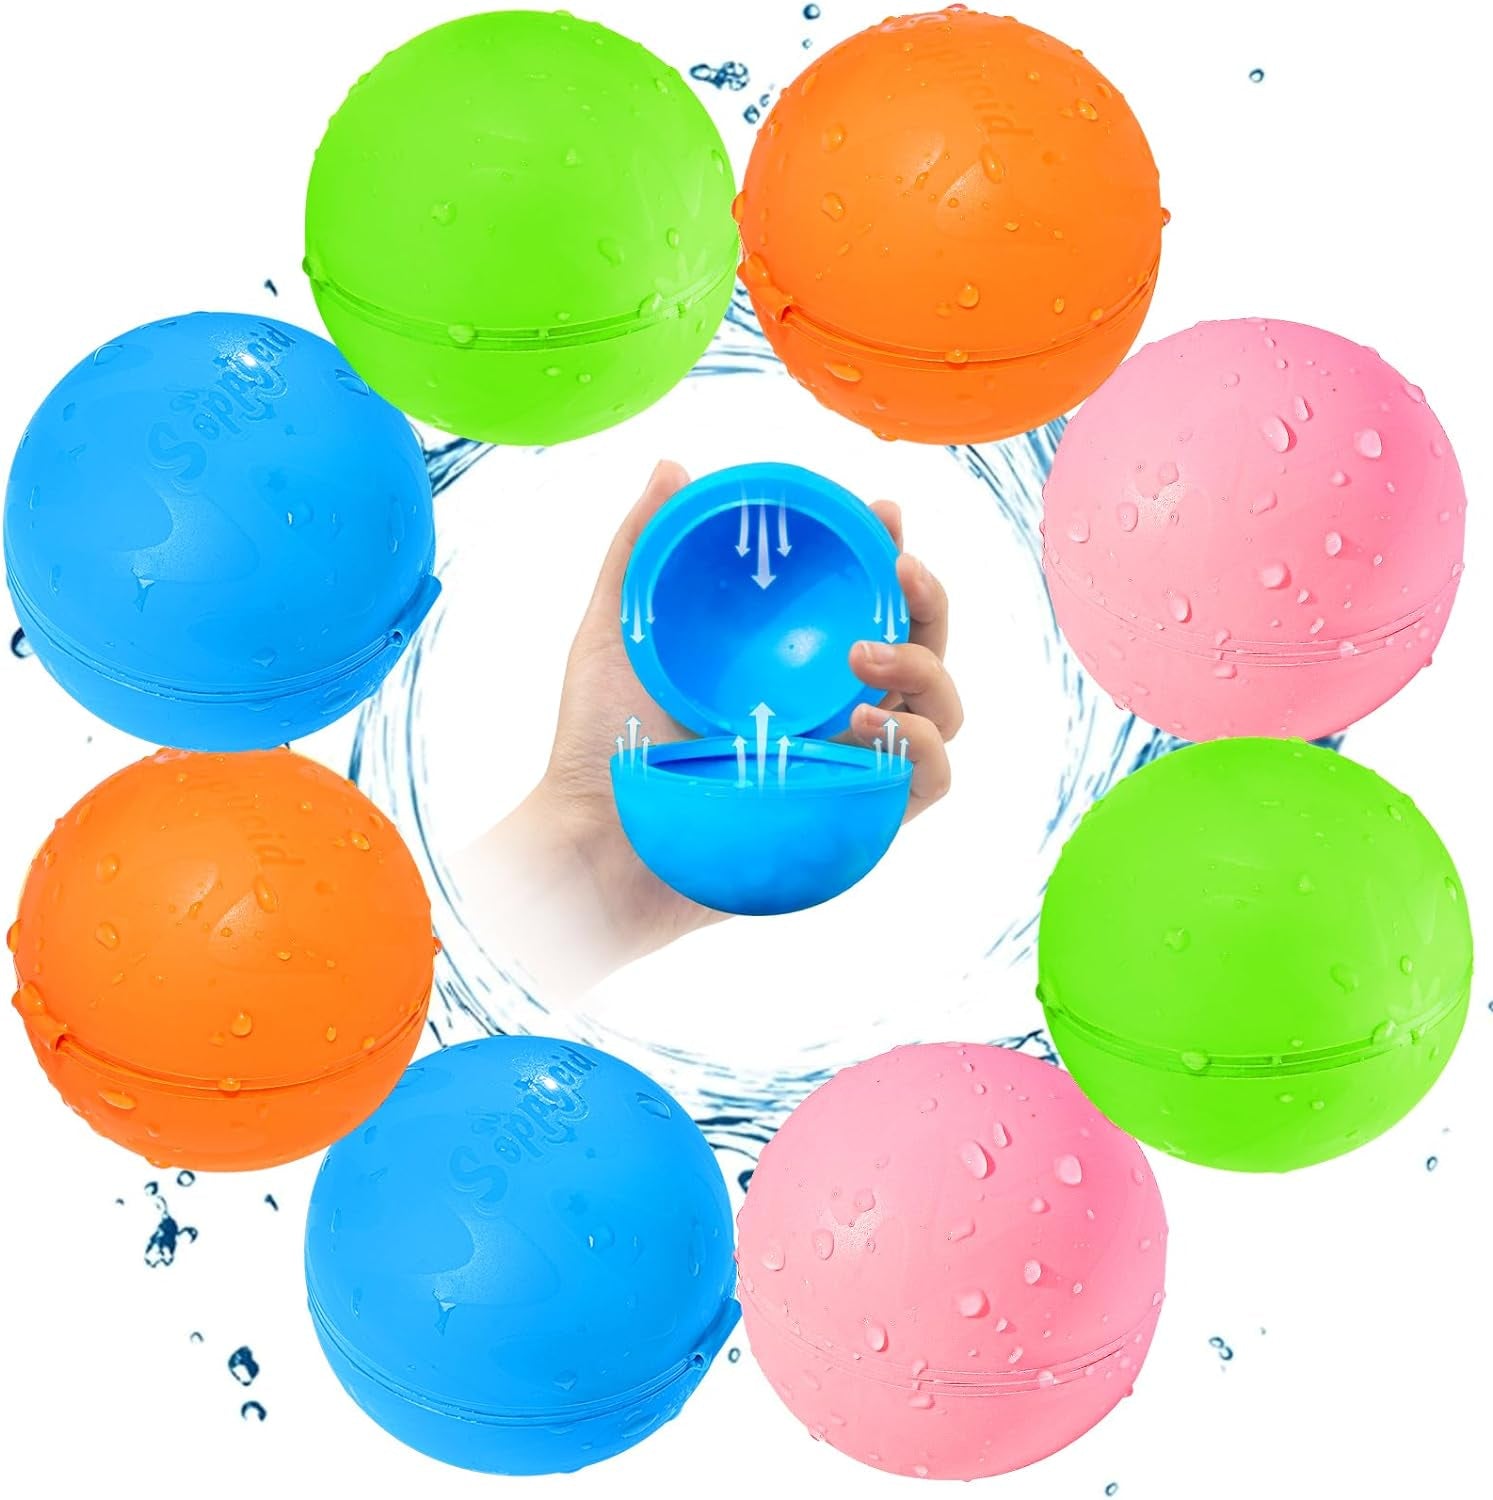 SOPPYCID Reusable Magnetic Water Balloons, 12 Pack Refillable Water Bombs Self Sealing Quick Fill, Latex-Free Silicone Outdoor Toys for Kids Adults Summer Fun Pool Beach Water Toys Birthday Gifts